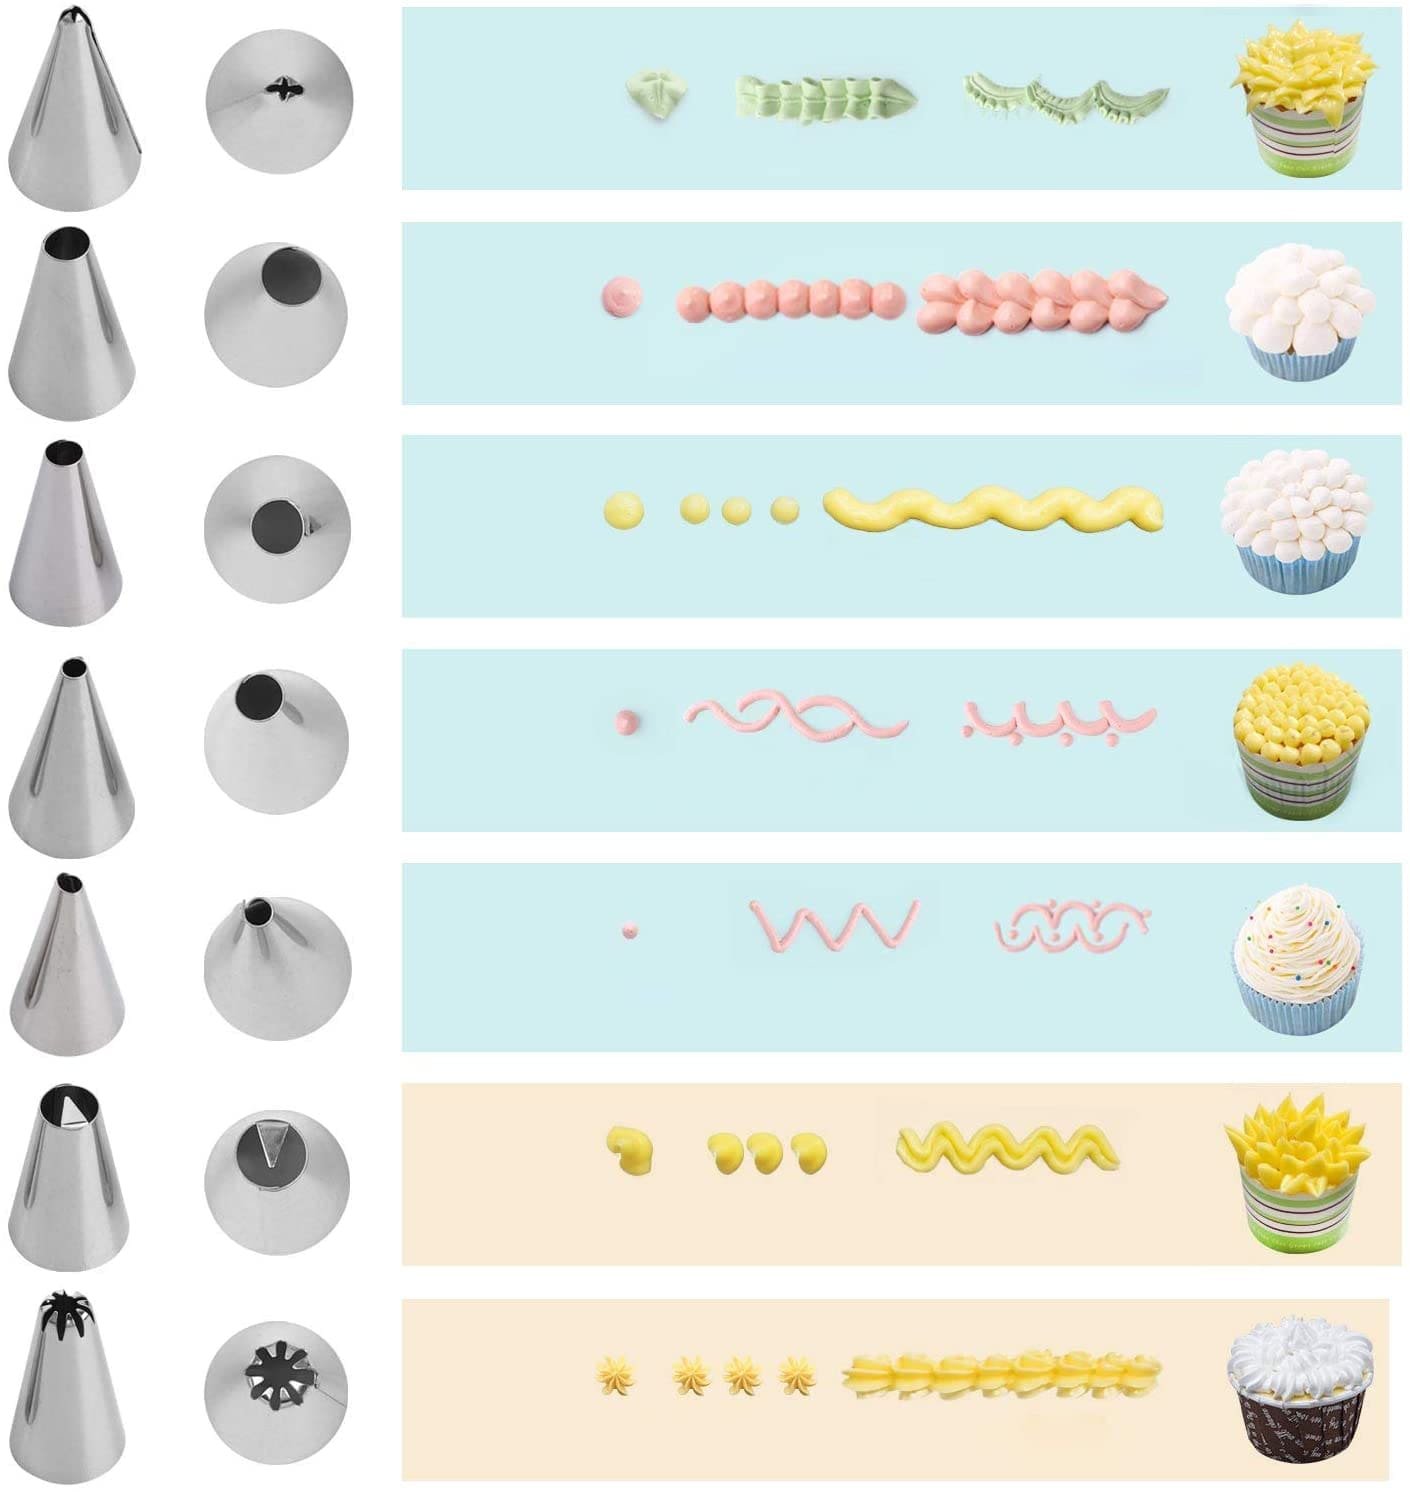 Amazon.com: Piping Tips Large Cake Decorating Tools,5 Pcs Cake Piping  Nozzles Tips Kit,DIY Icing Nozzle Tool for Cupcakes,1A 1M 2A 2D 4B: Home &  Kitchen